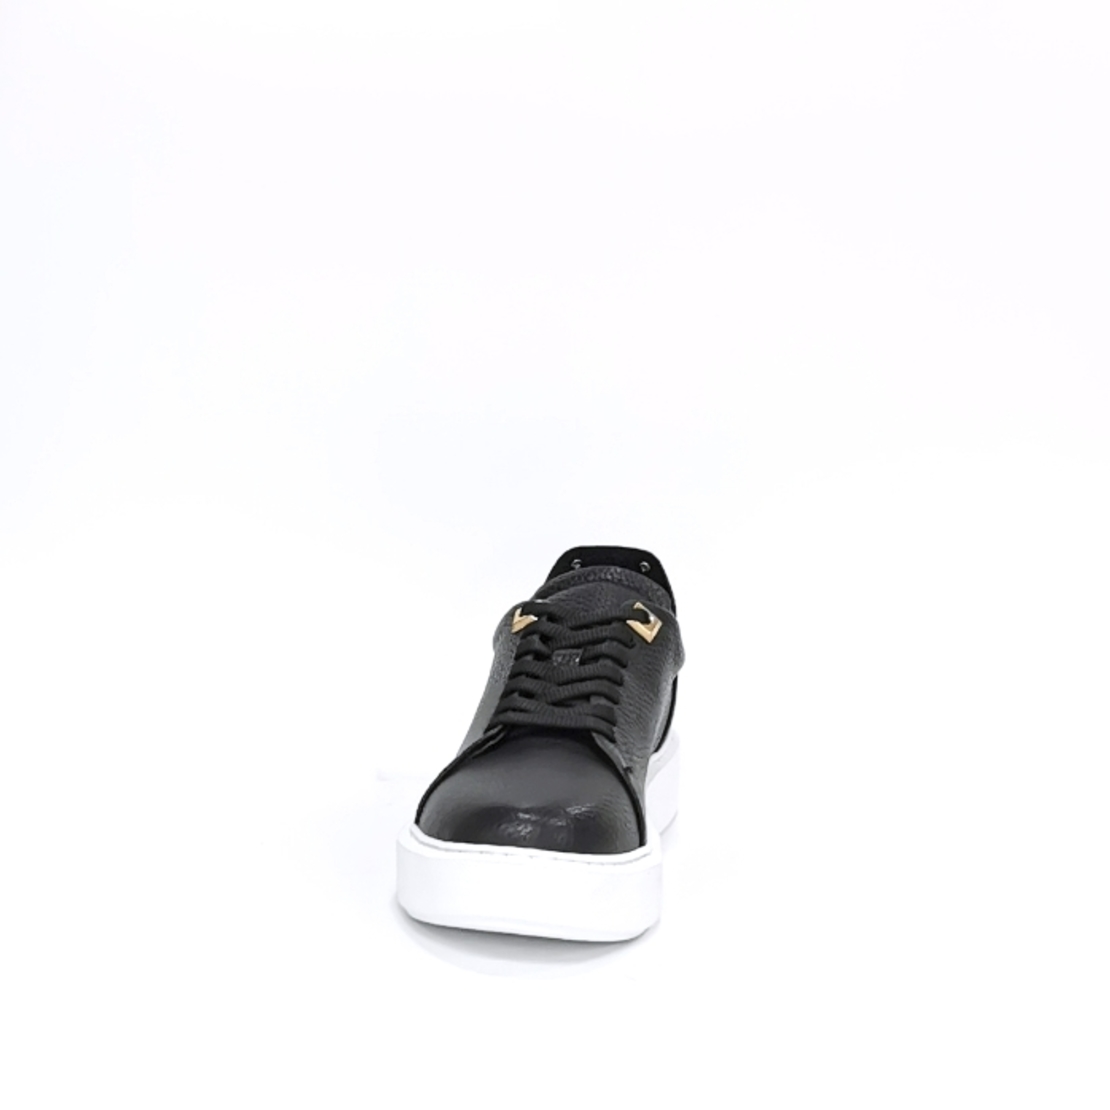 Women's sneaker made of natural leather in black color with anatomical insole/7785